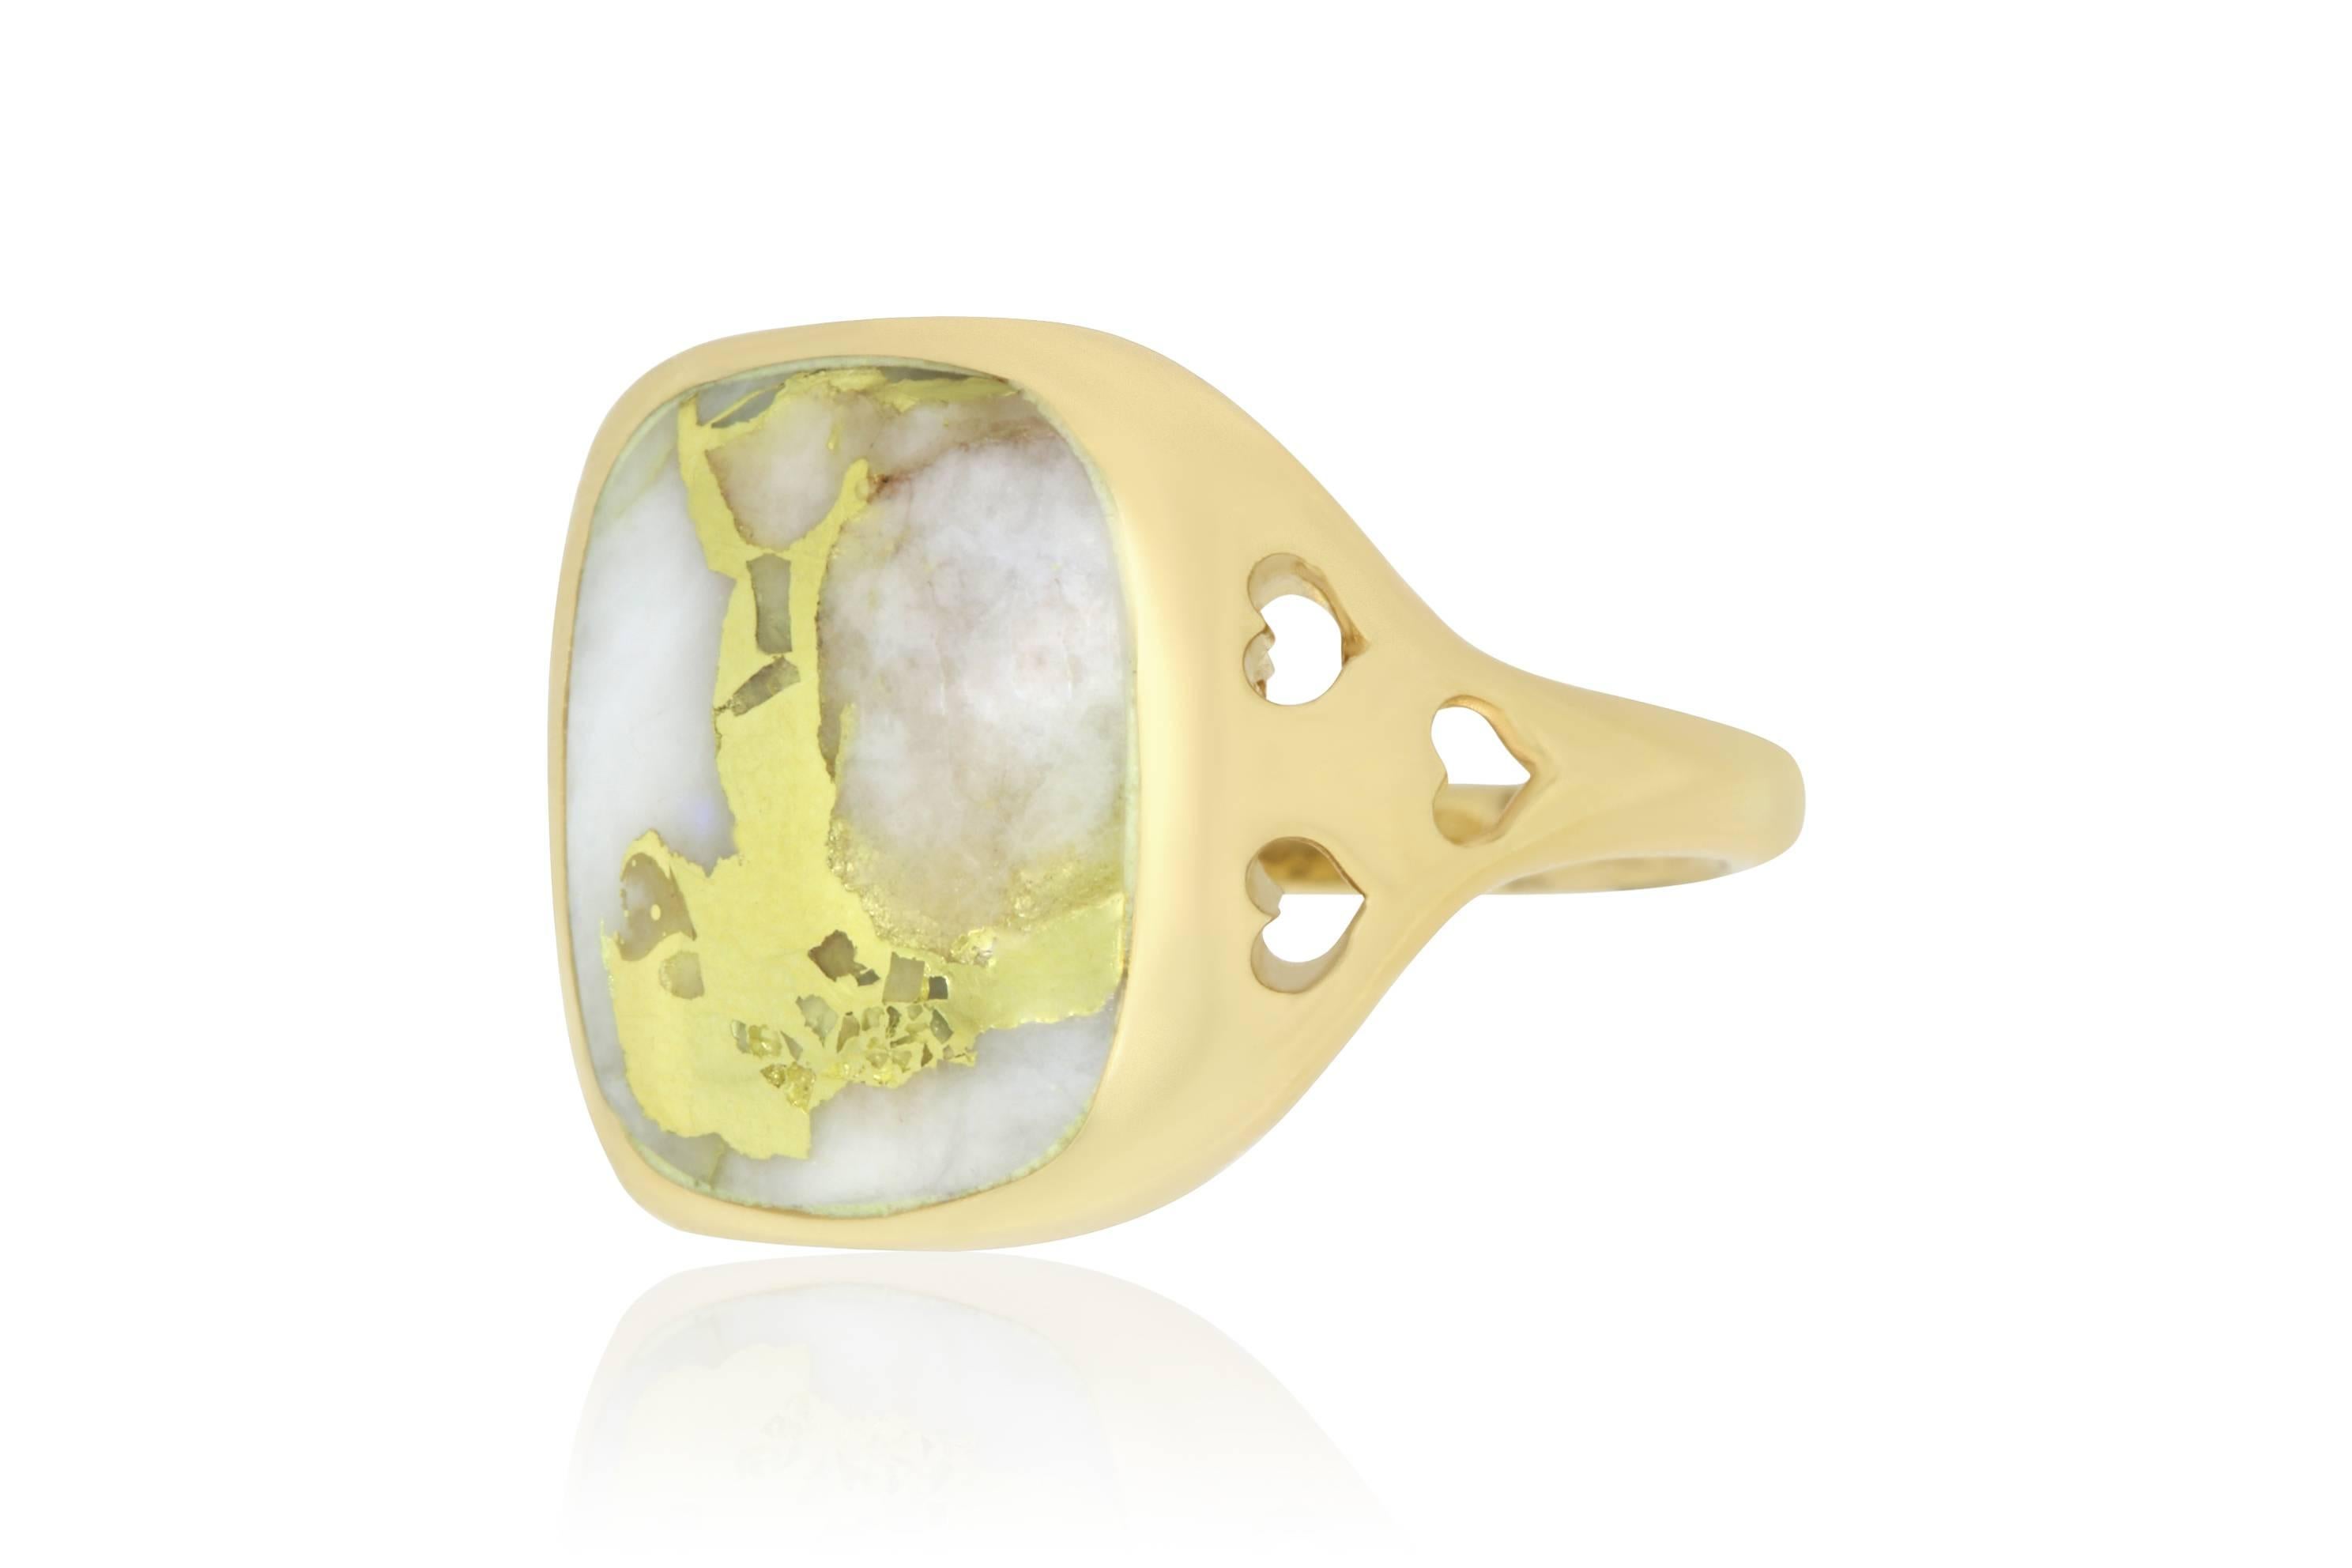 This unique Gold in Quartz stone weighs in at 8.43 carats. Set in a 14k Yellow Gold band featuring 3 hearts on each side.

Material: 14k Yellow Gold
Gemstones: 1 Rectangular Gold in Quartz at 8.43 Carats.
Ring Size: 6.5. Alberto offers complimentary